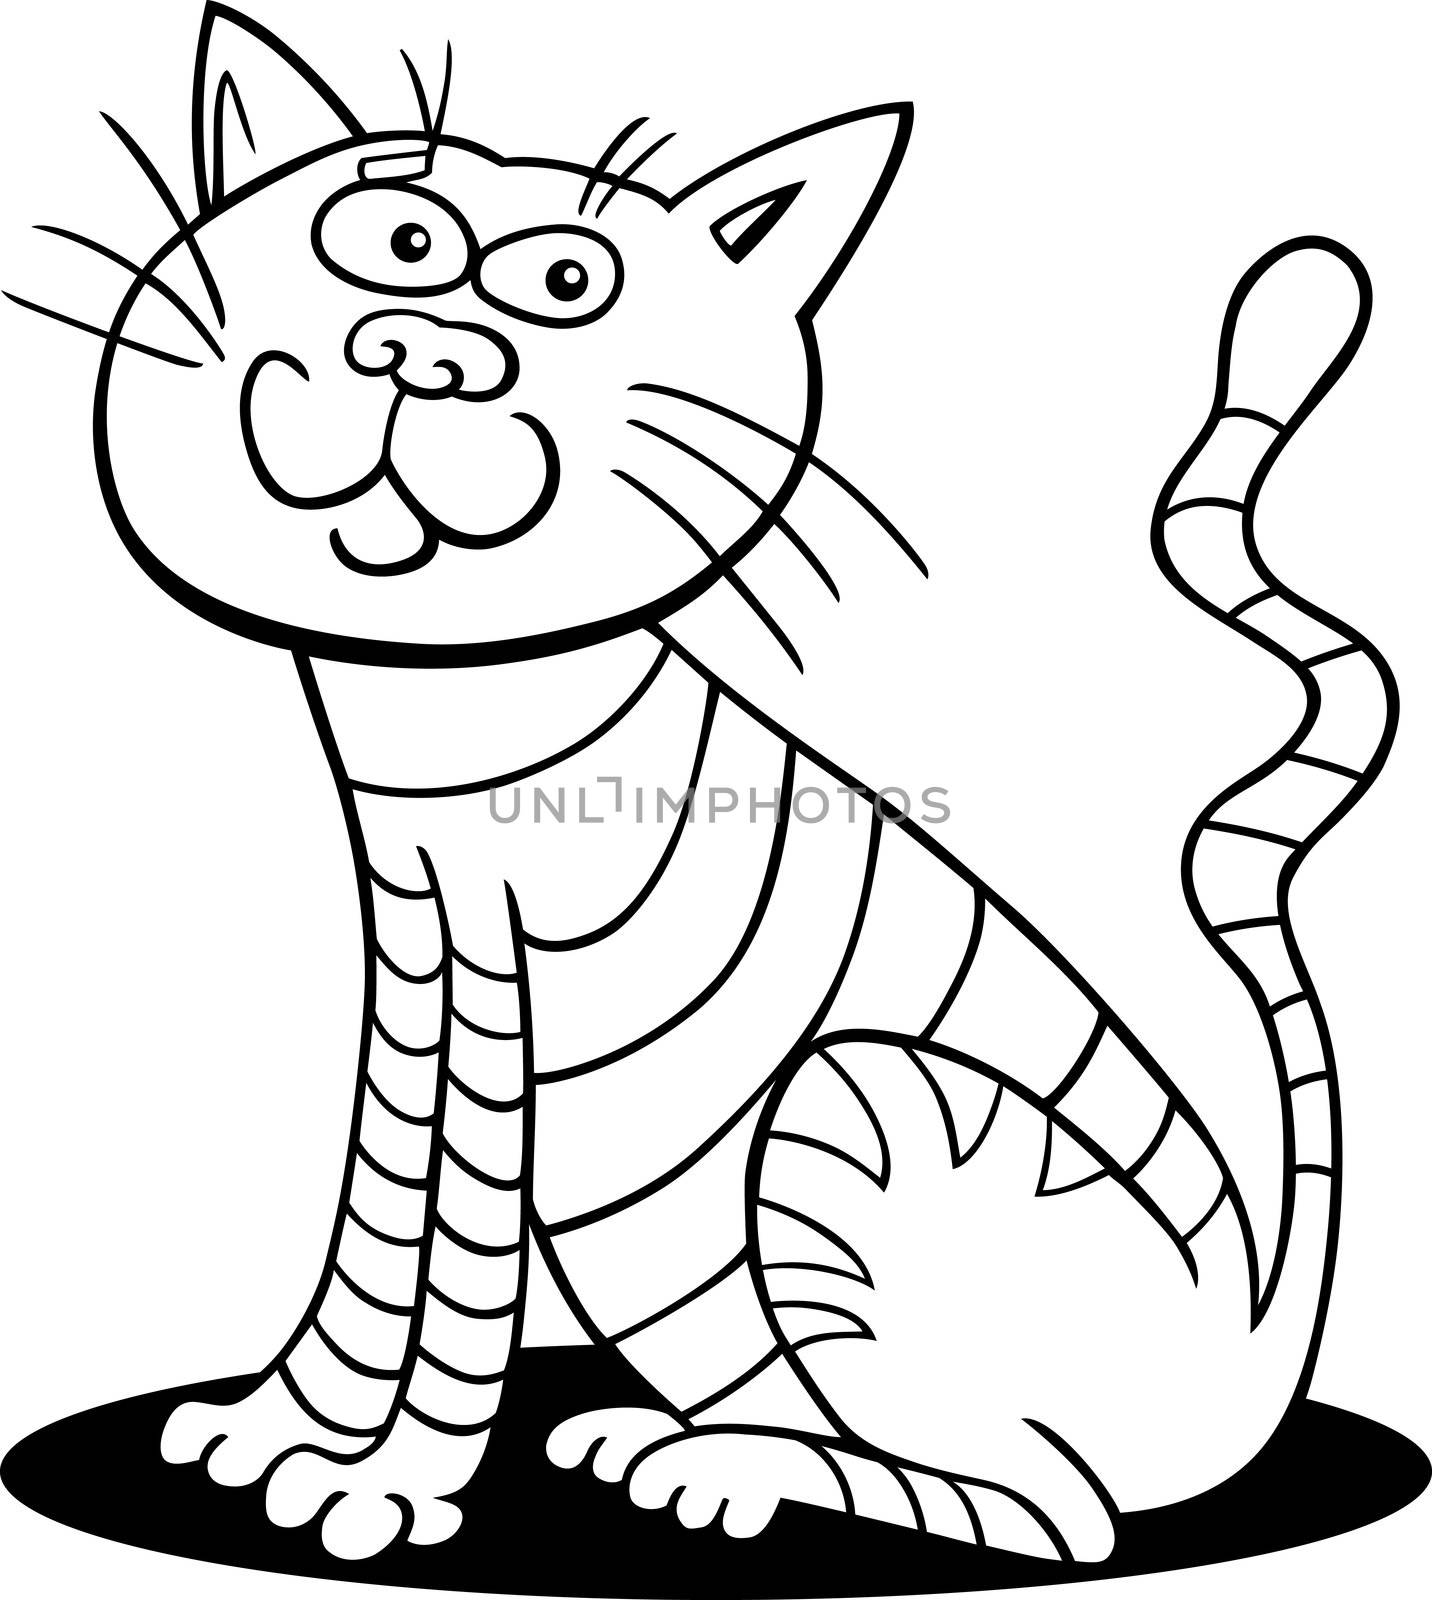 cartoon illustration of sitting cat for coloring book